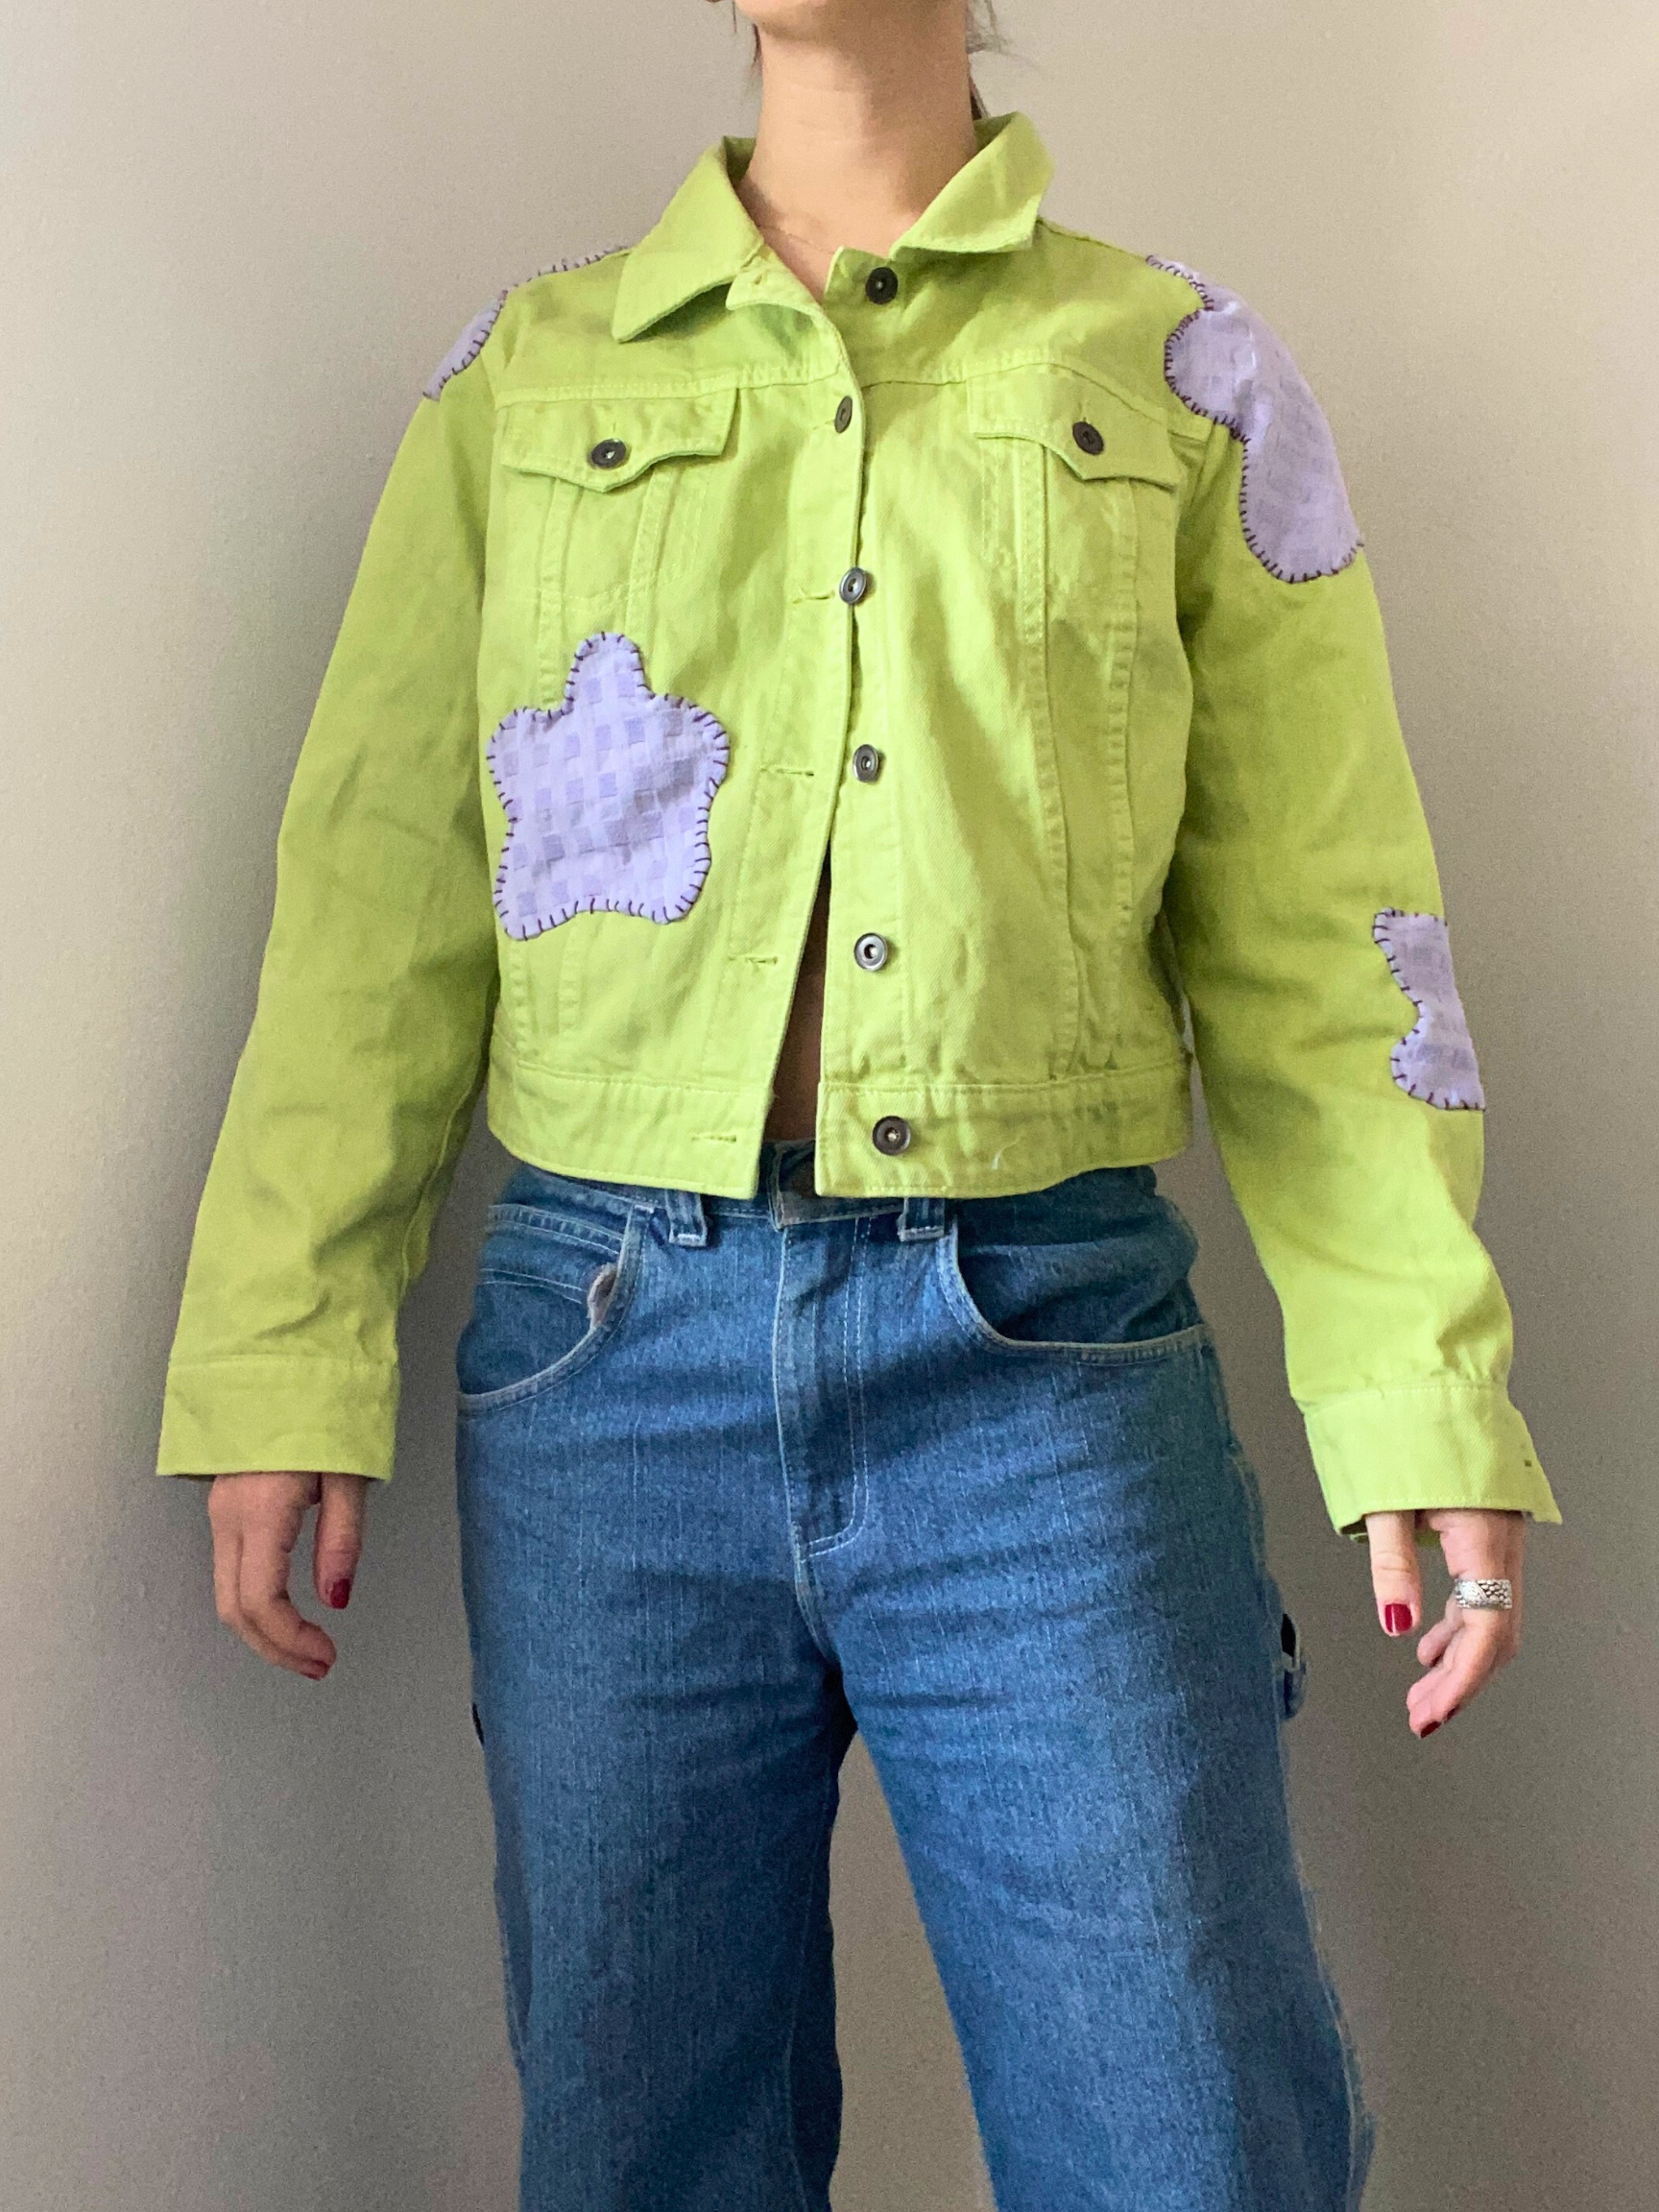 Flower Fields Green Denim Jacket- Upcycled Jacket with Purple Flower Patches